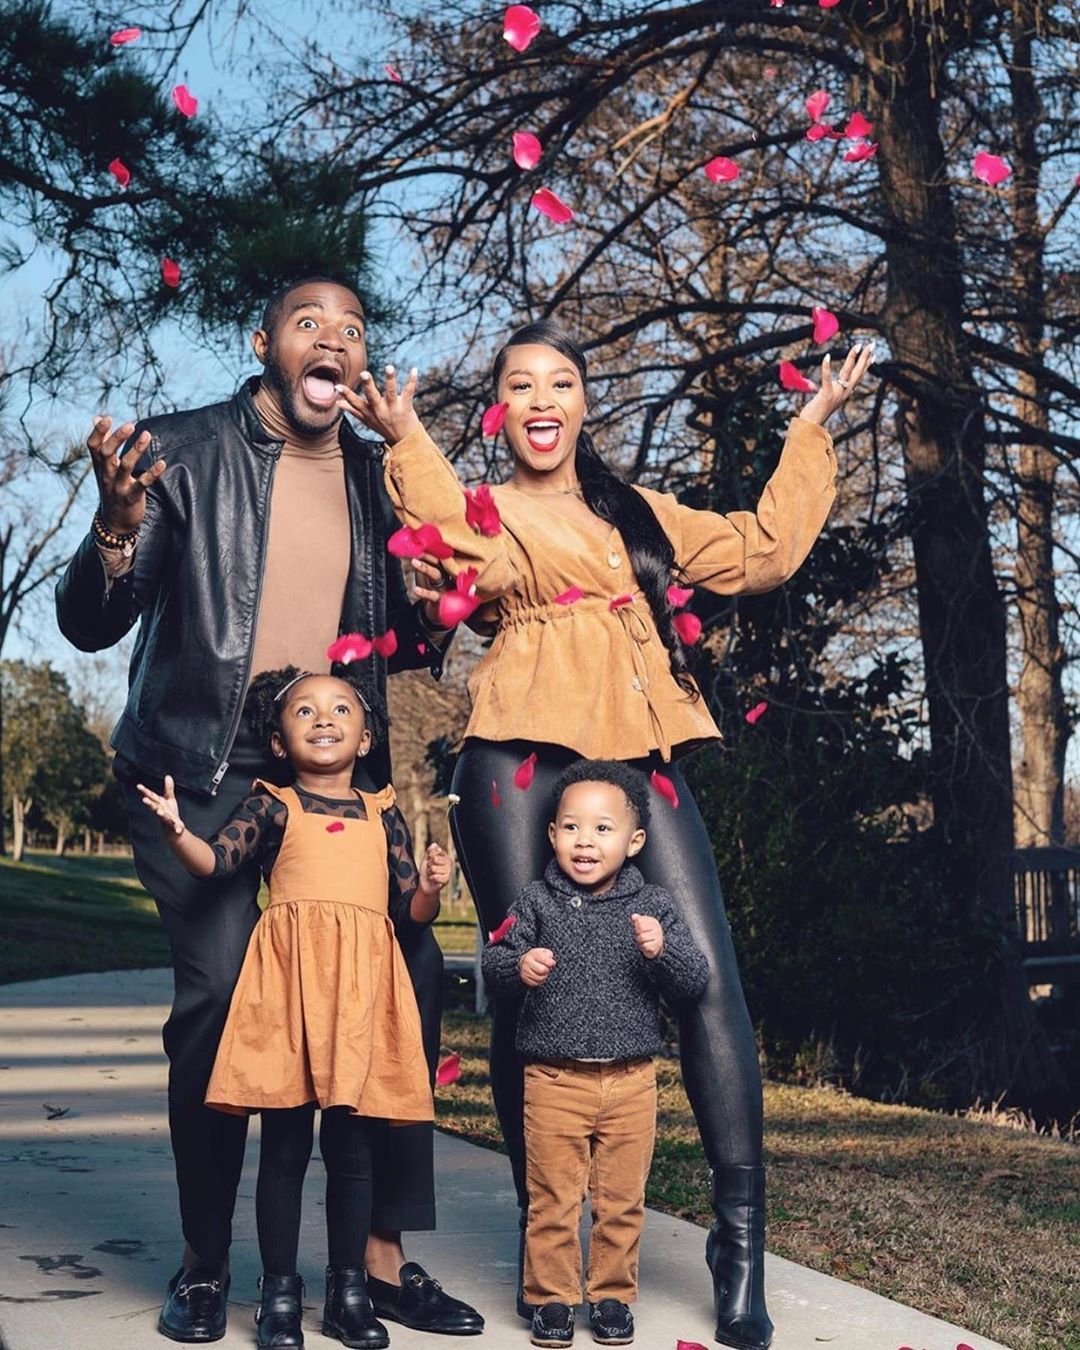 Contrast-and-colors.-2 70+ Best Family Photoshoot Outfit Ideas That You Must Check